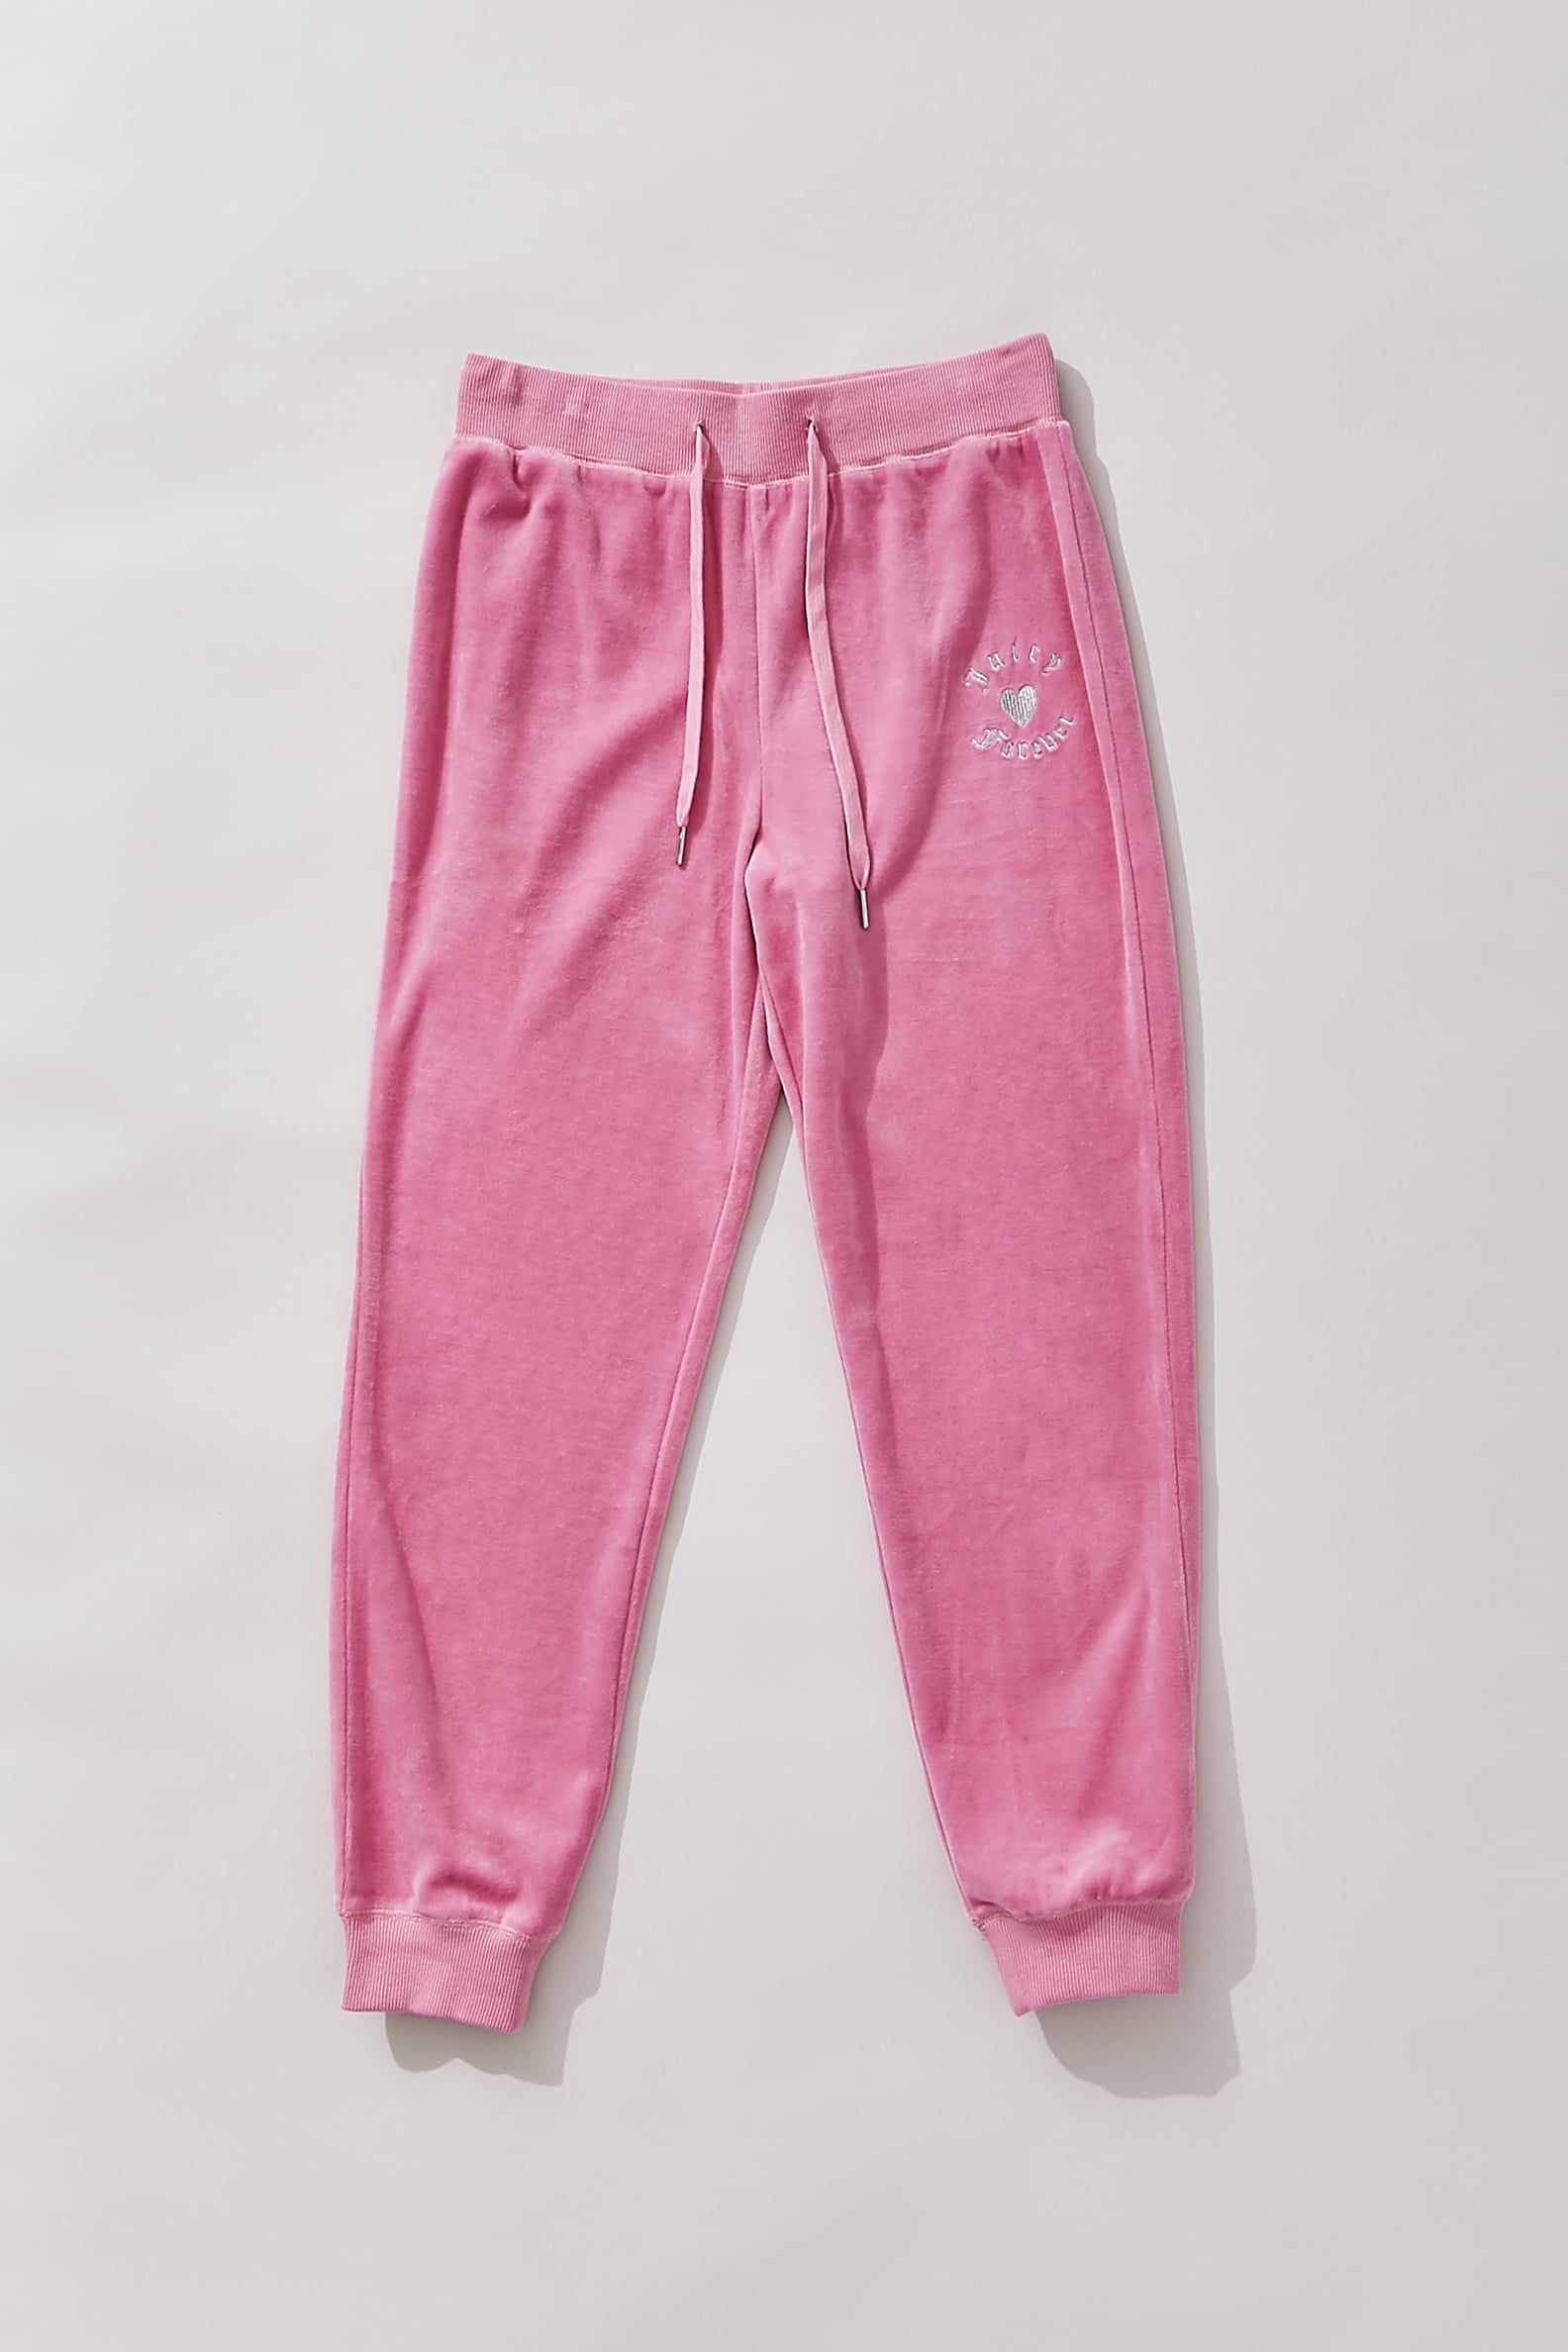 Juicy Couture Drops New Sweatsuit Collection at Forever 21 | POPSUGAR ...